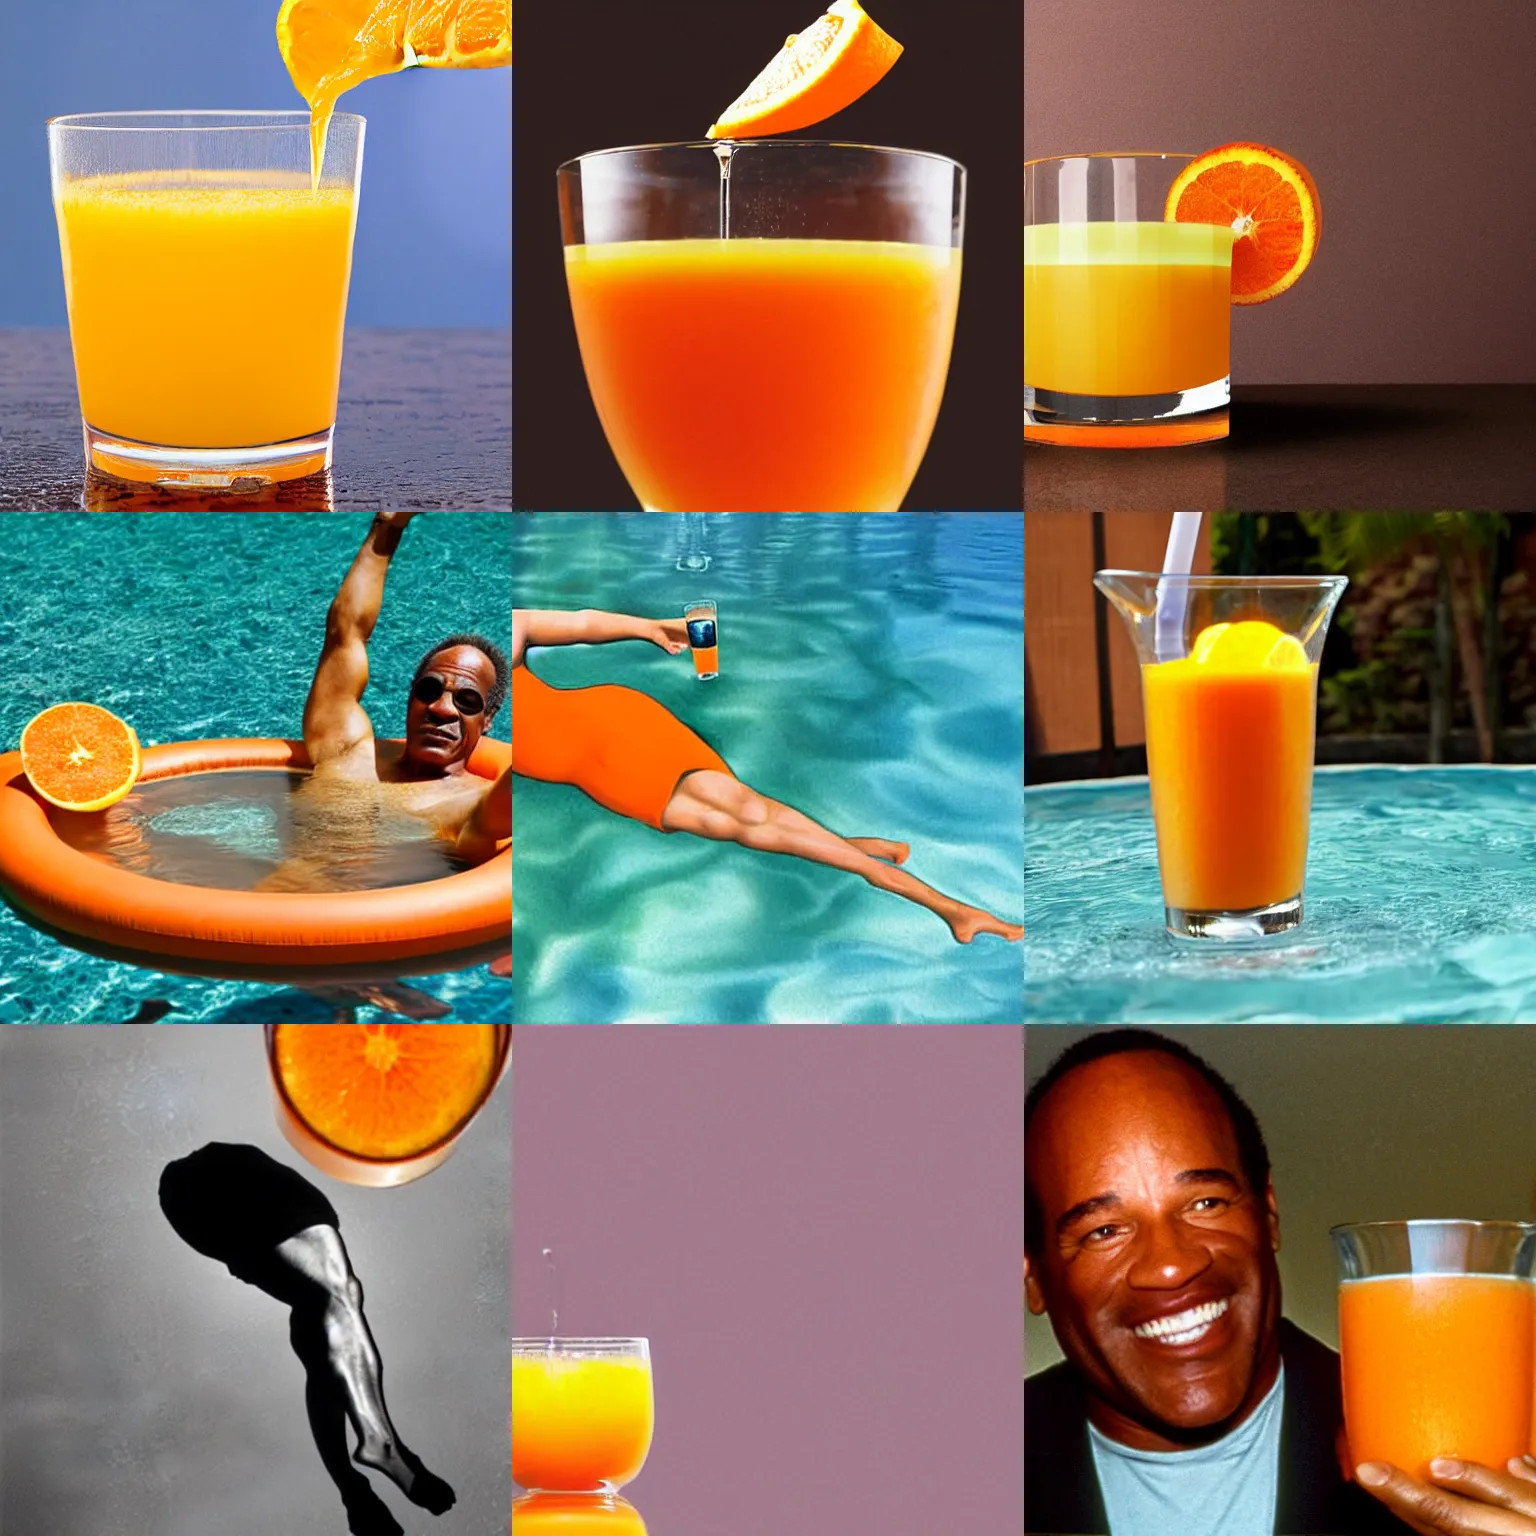 Prompt: ( shrunk down o j simpson ) floating in floating in [ a glass of orange juice ]